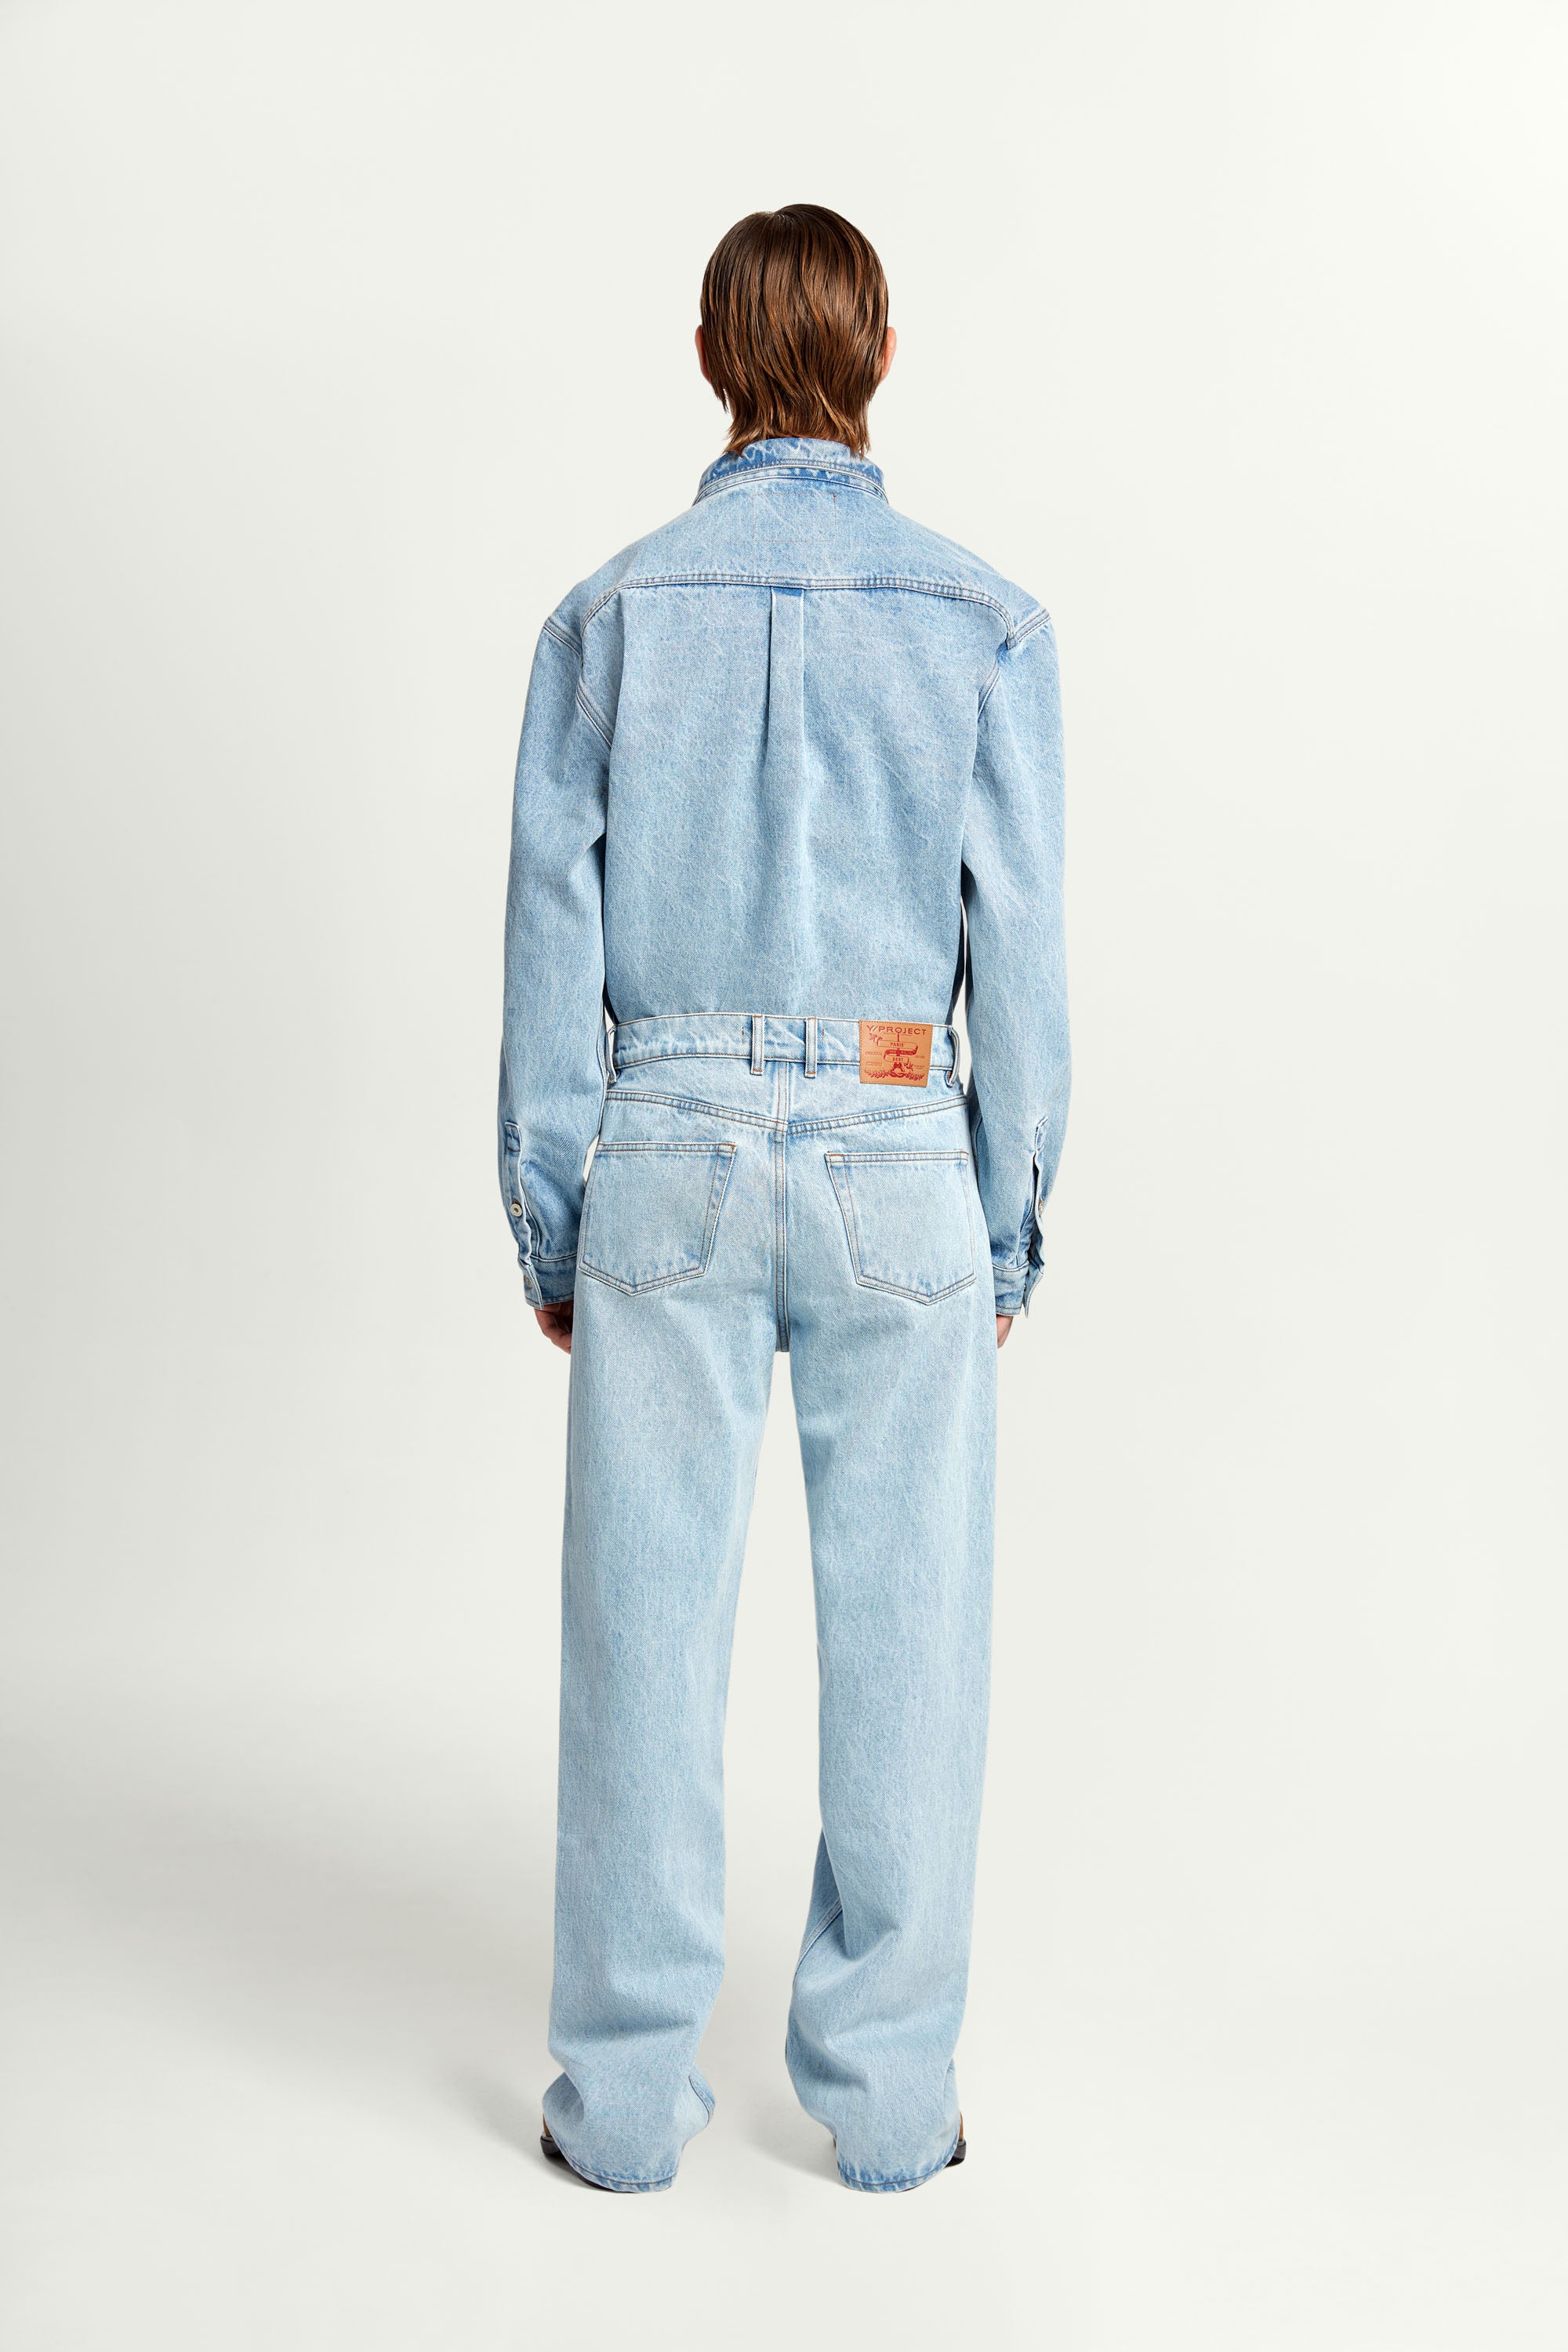 Yproject 22aw Pinched Logo denim-